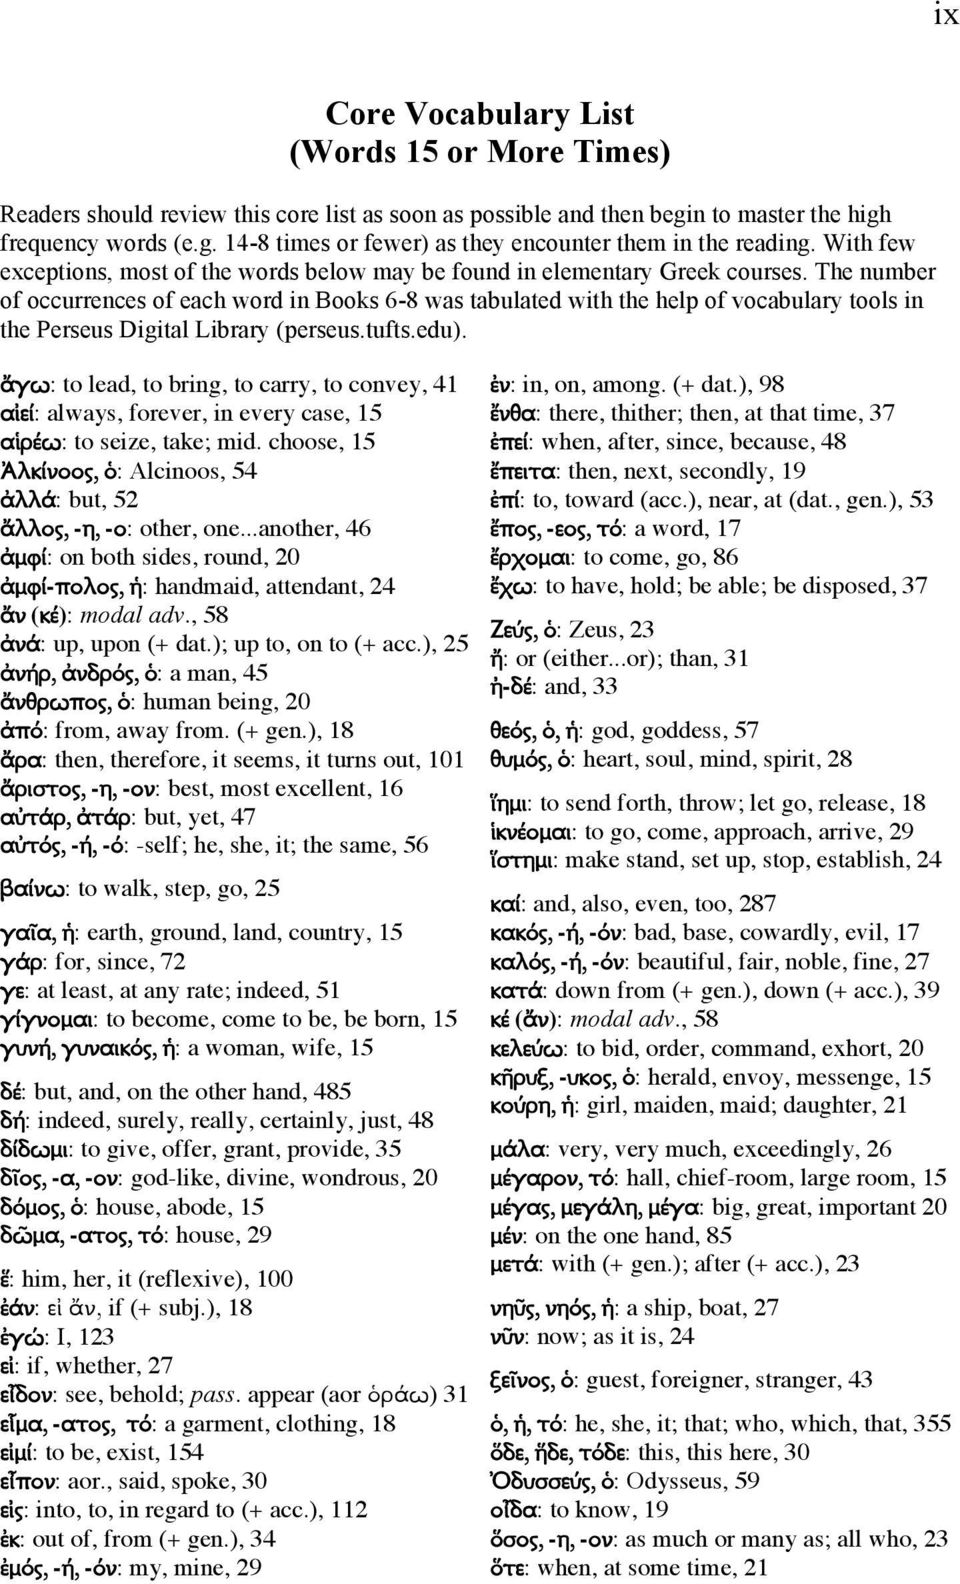 The number of occurrences of each word in Books 6-8 was tabulated with the help of vocabulary tools in the Perseus Digital Library (perseus.tufts.edu).